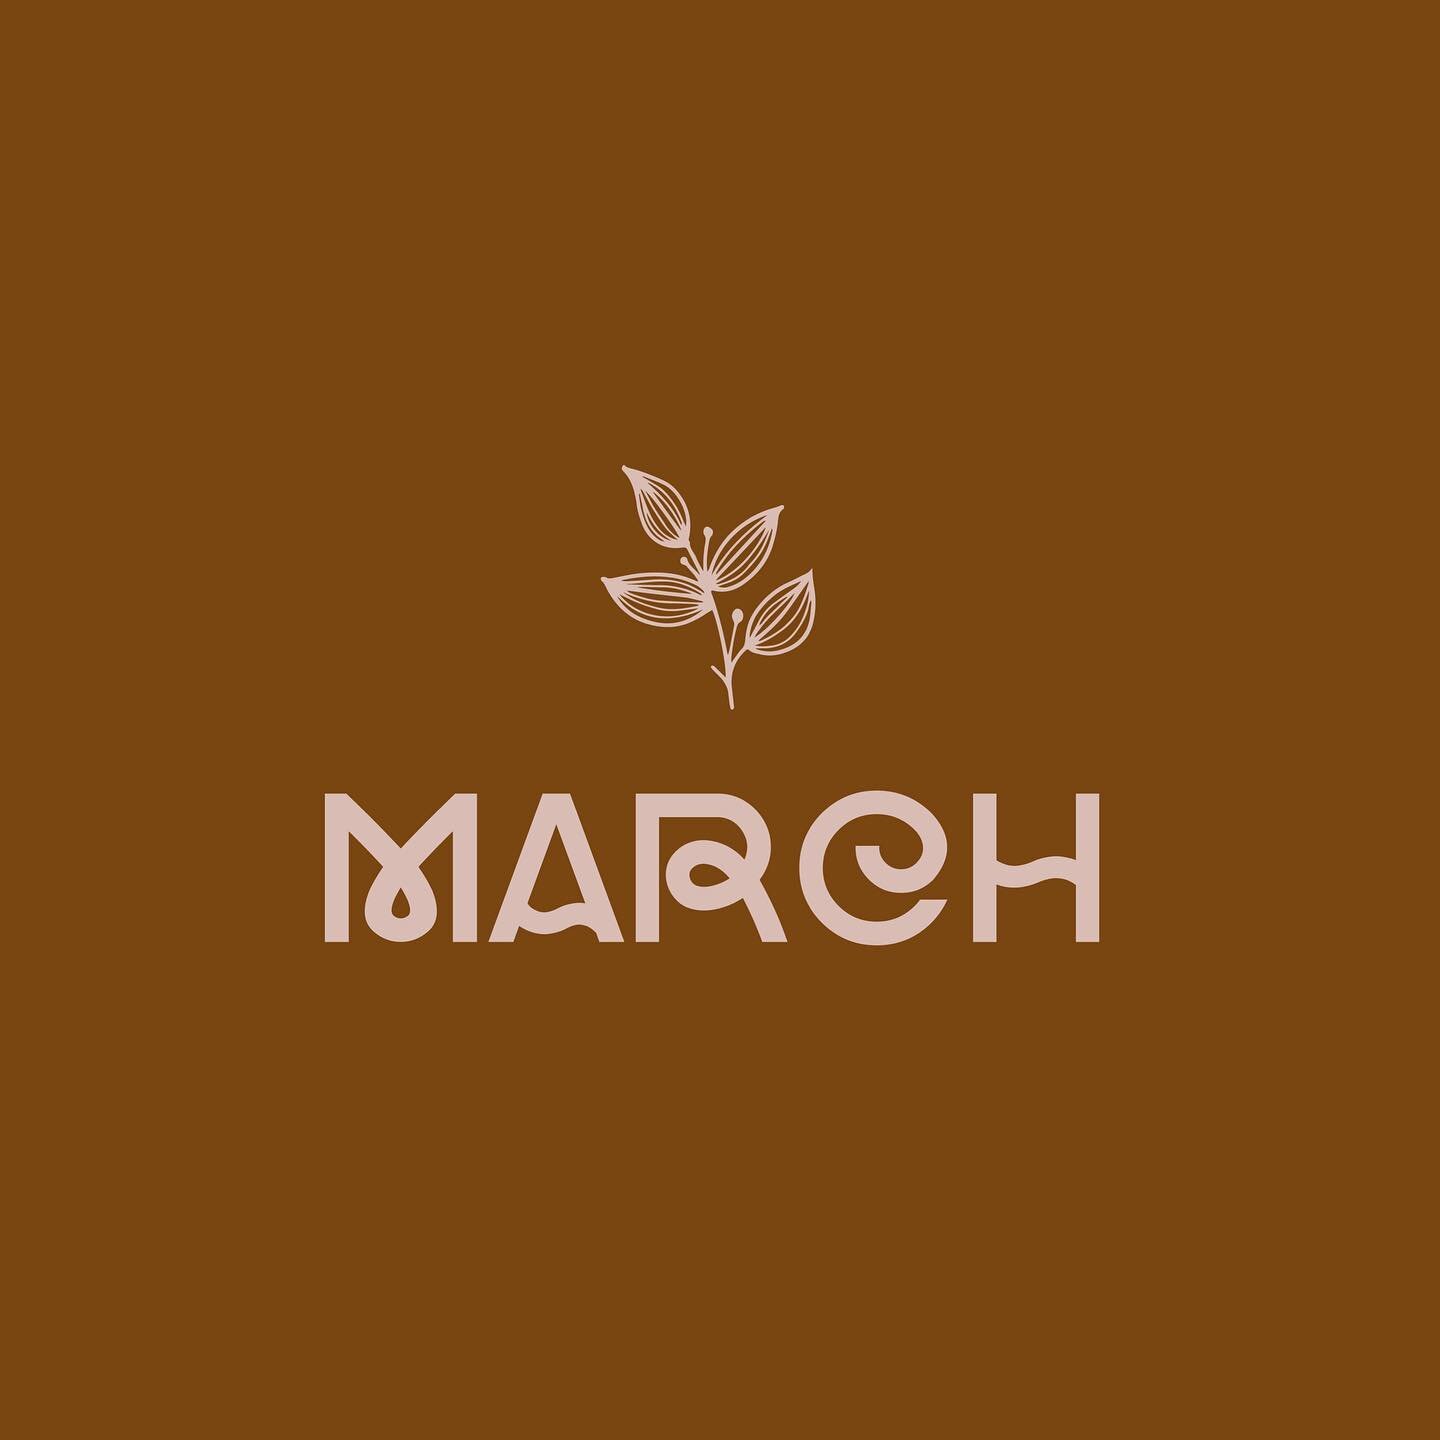 March, what to say about March? Chickenpox and operations? Er rain and some great work projects? None of this sounds interesting&hellip; books? Oh yes, some great books. Over on my March journal now. Link in my bio.